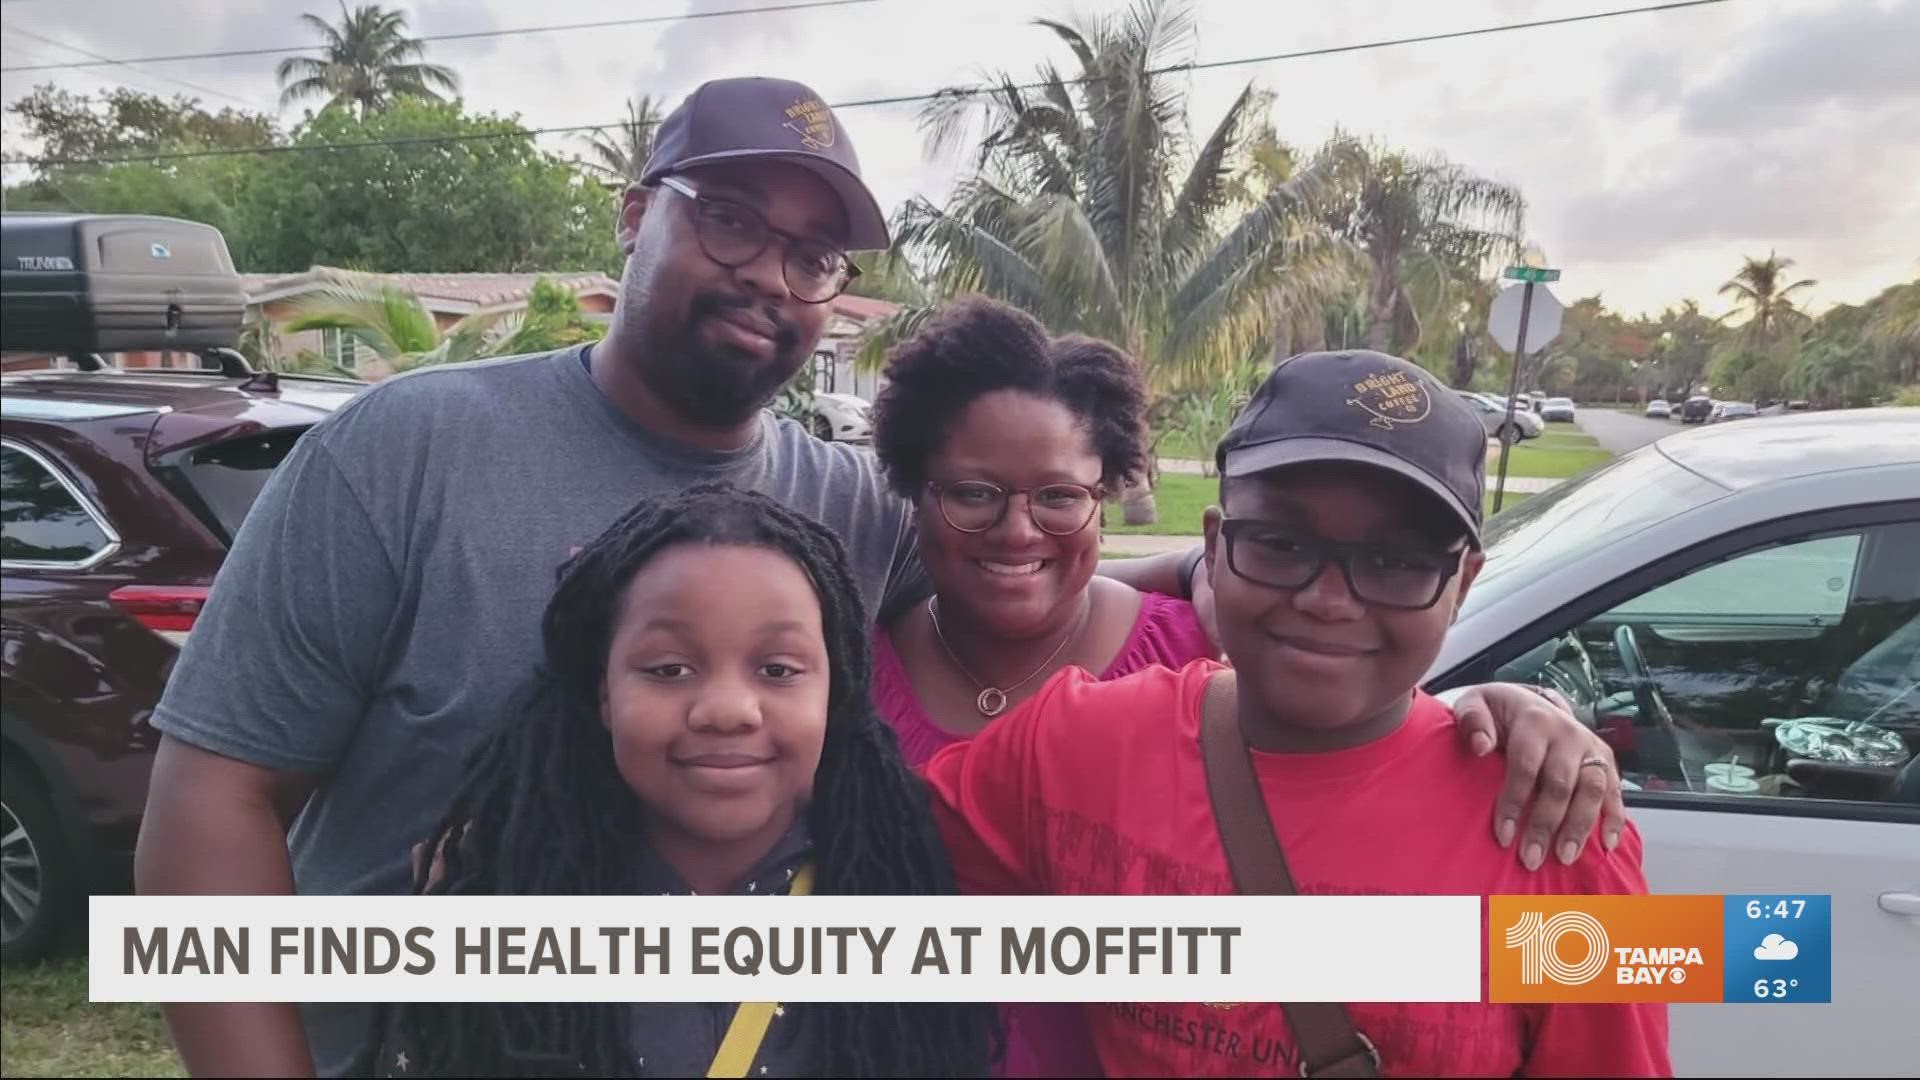 Moffitt Cancer Center is constantly implementing care for patients through new research. An important part of a patient’s treatment plan is empathy.